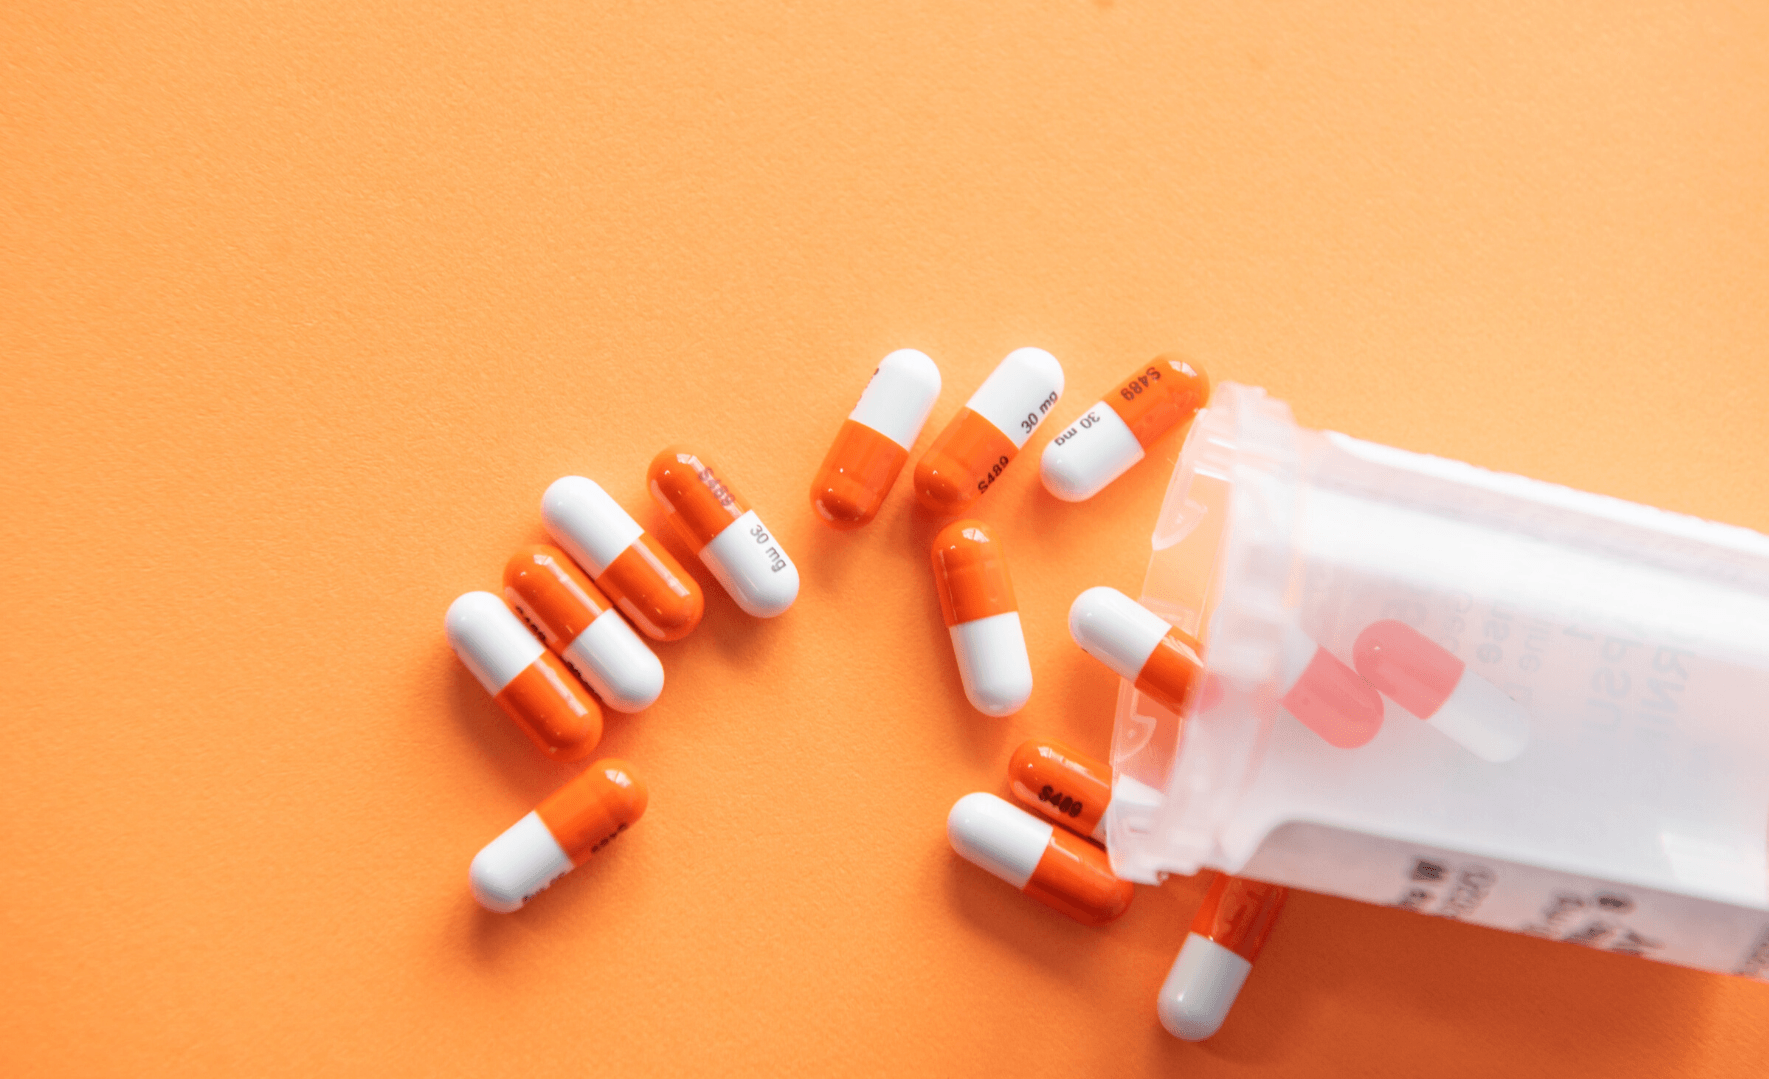 Picture of a tub of pills spilled on an orange background